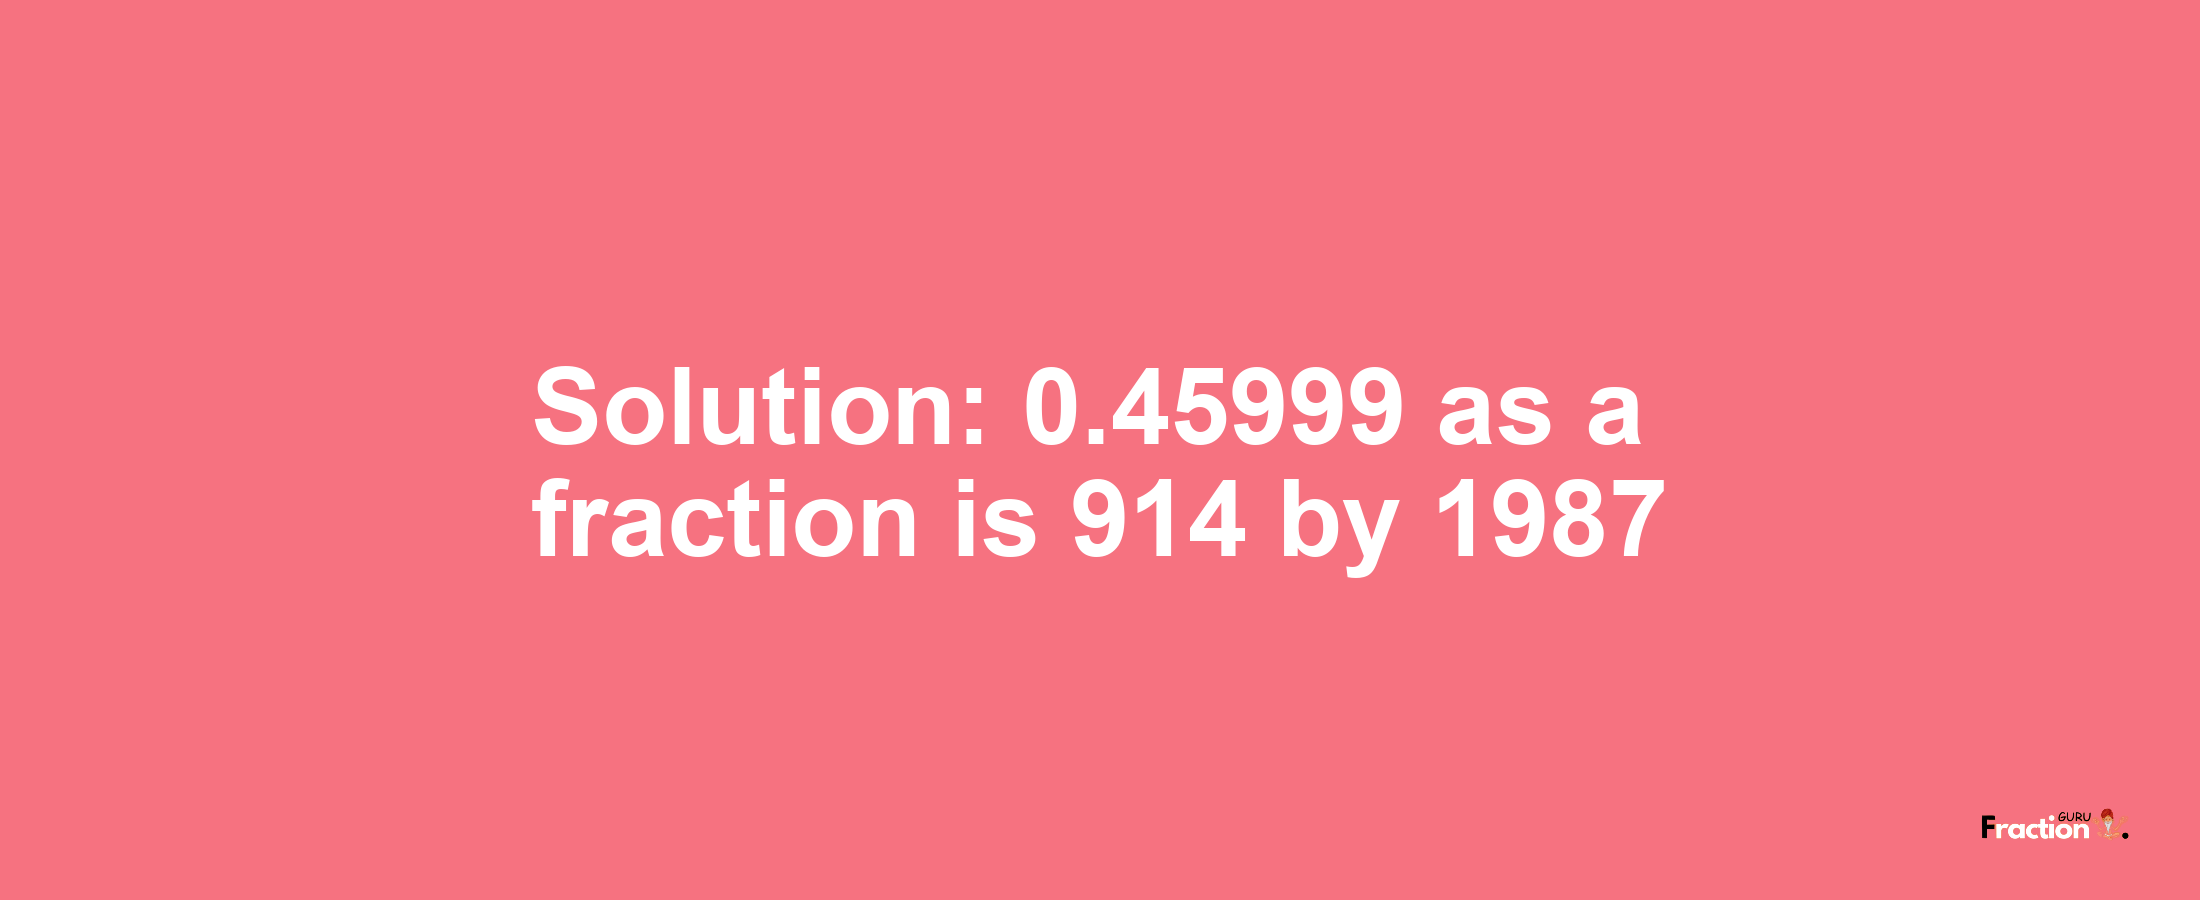 Solution:0.45999 as a fraction is 914/1987